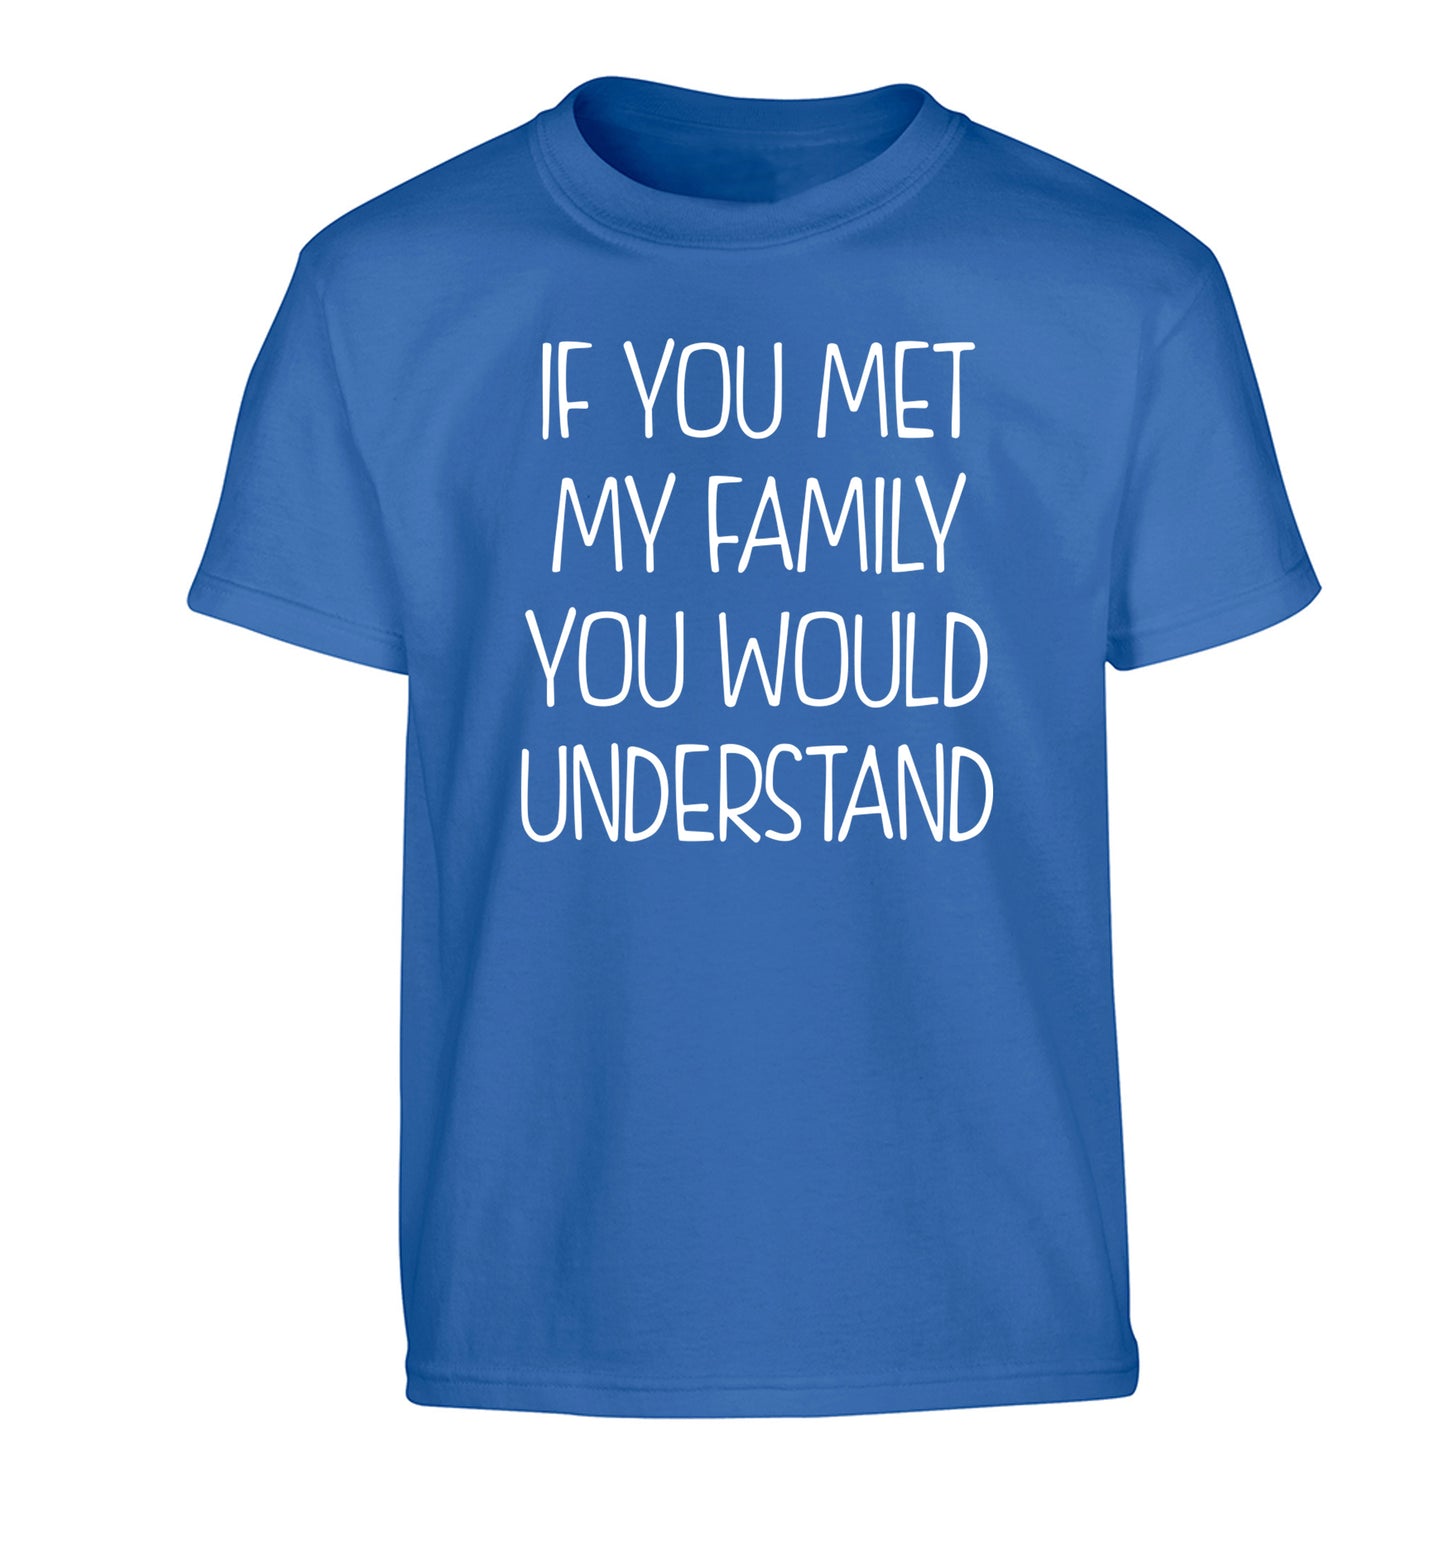 If you met my family you would understand Children's blue Tshirt 12-13 Years